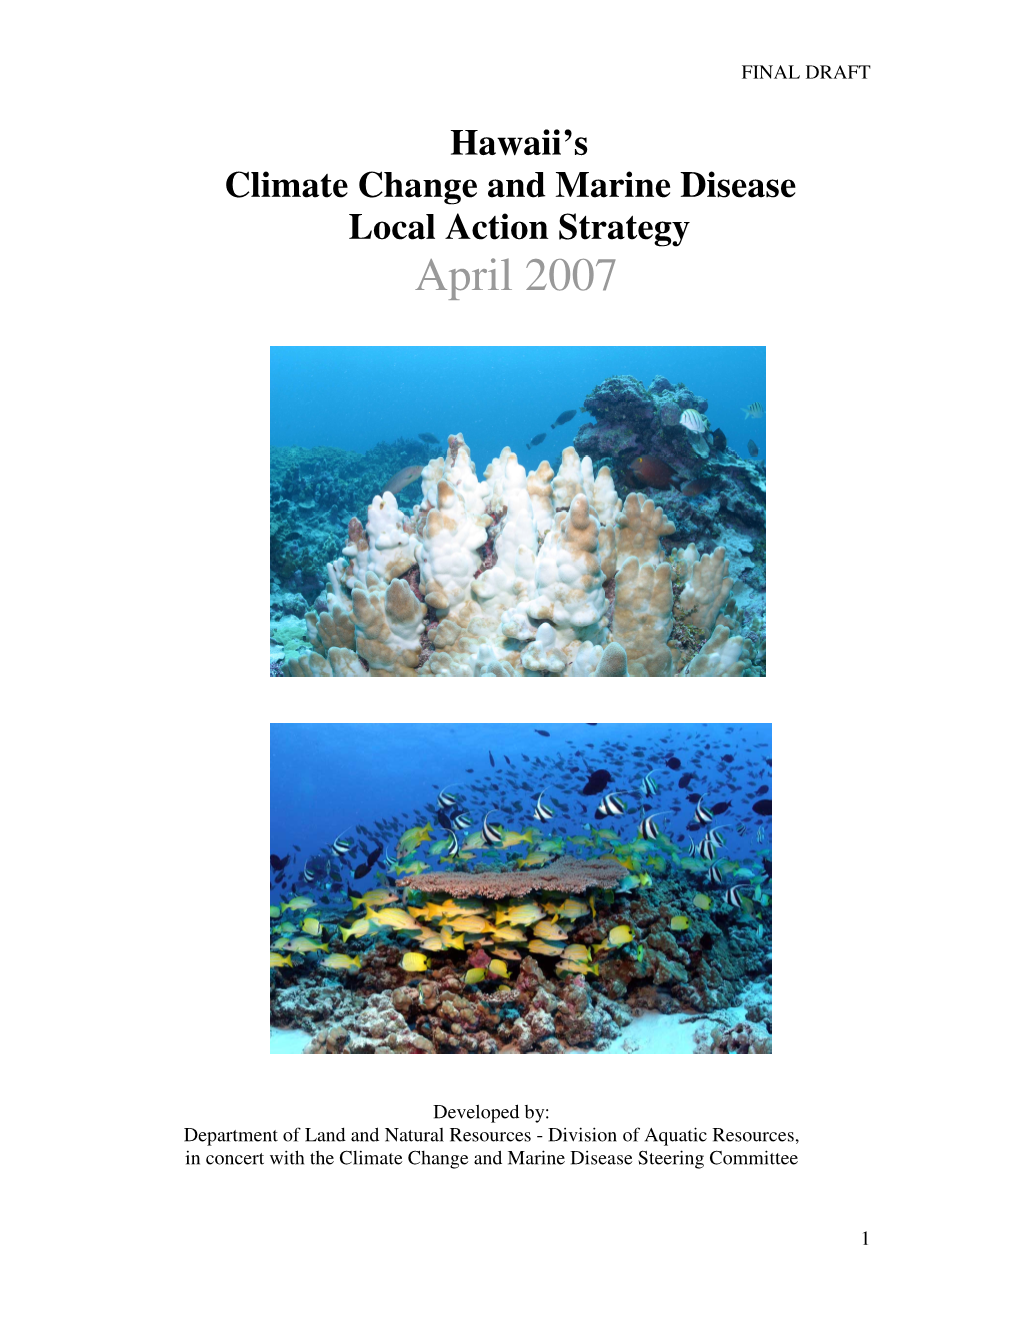 Hawaii's Climate Change and Marine Disease Local Action Strategy April